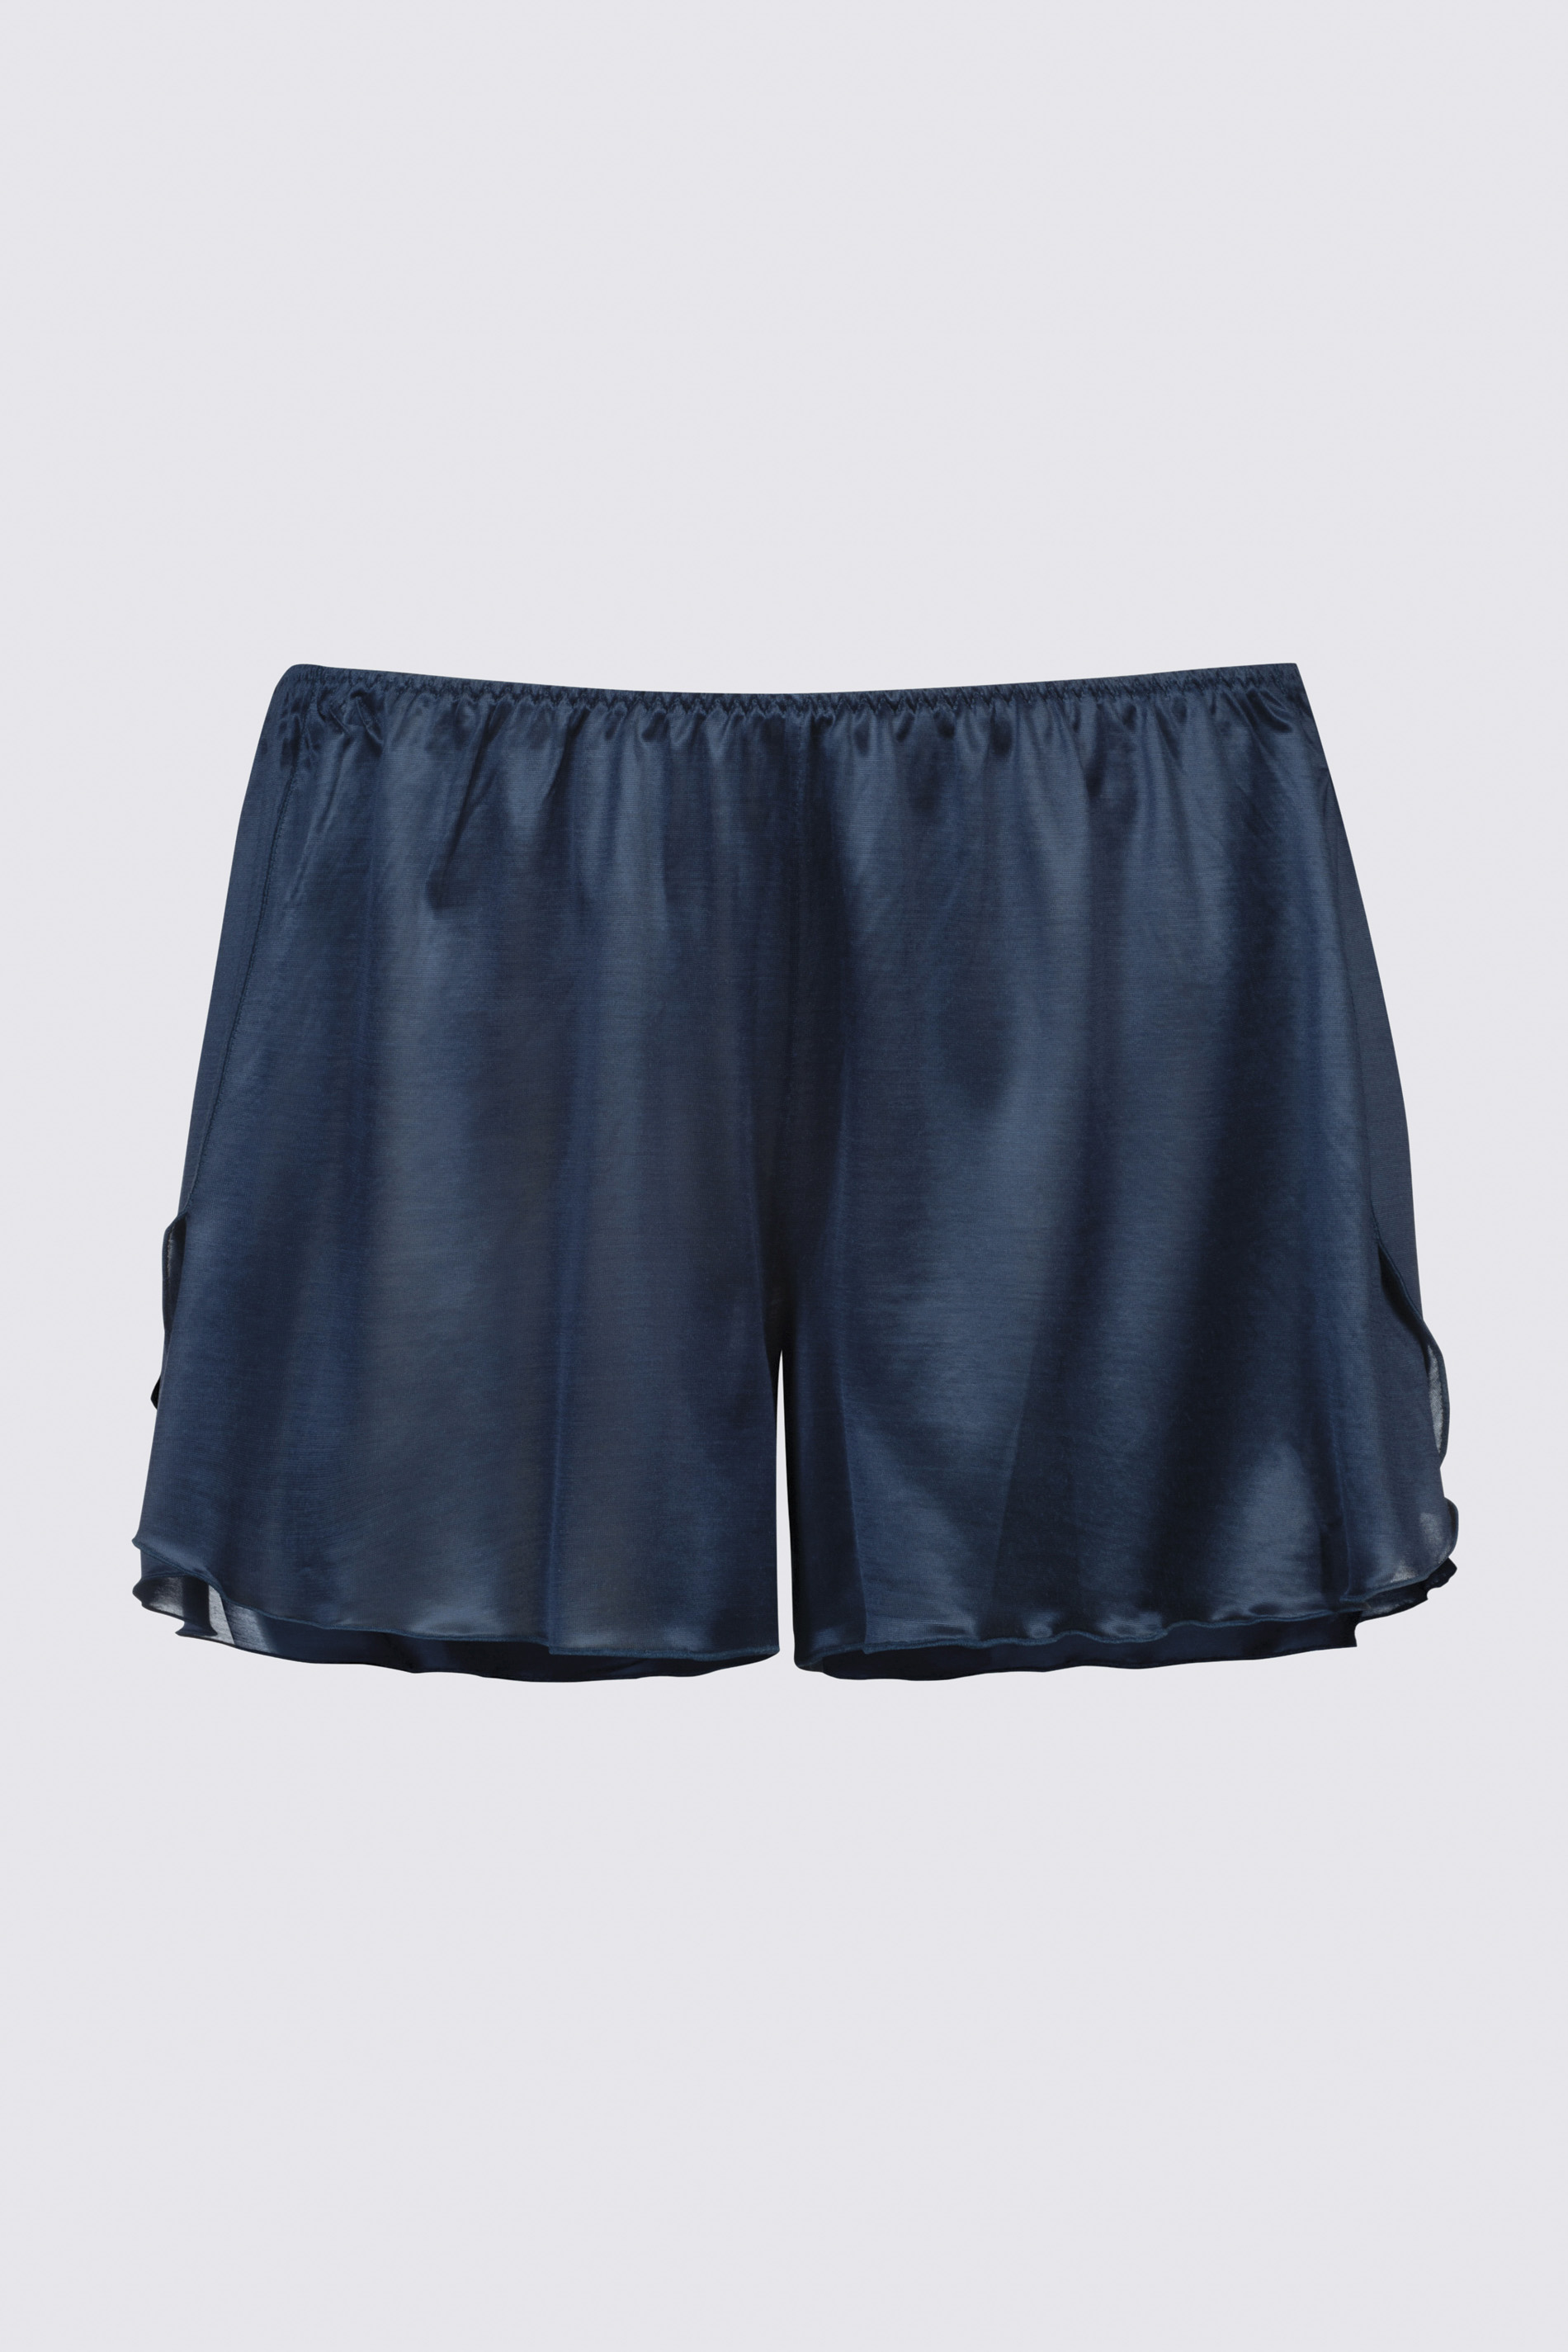 French knicker Ink Blue Serie Coco Uitknippen | mey®